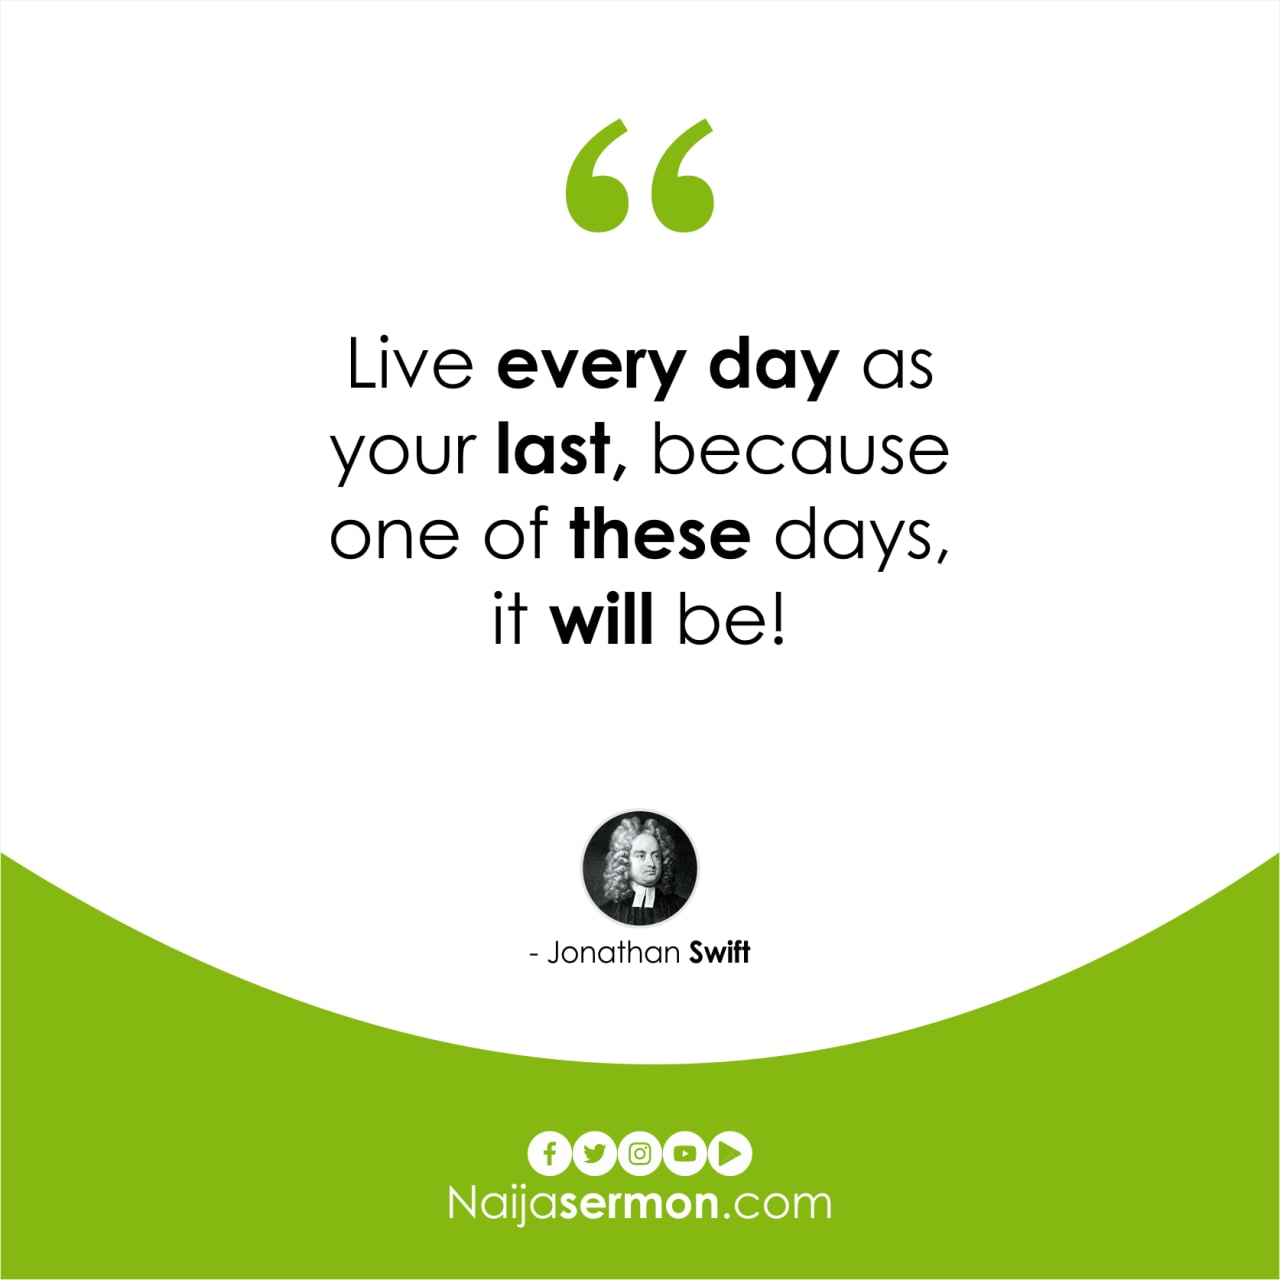 QUOTE OF THE DAY BY JONATHAN SWIFT 14